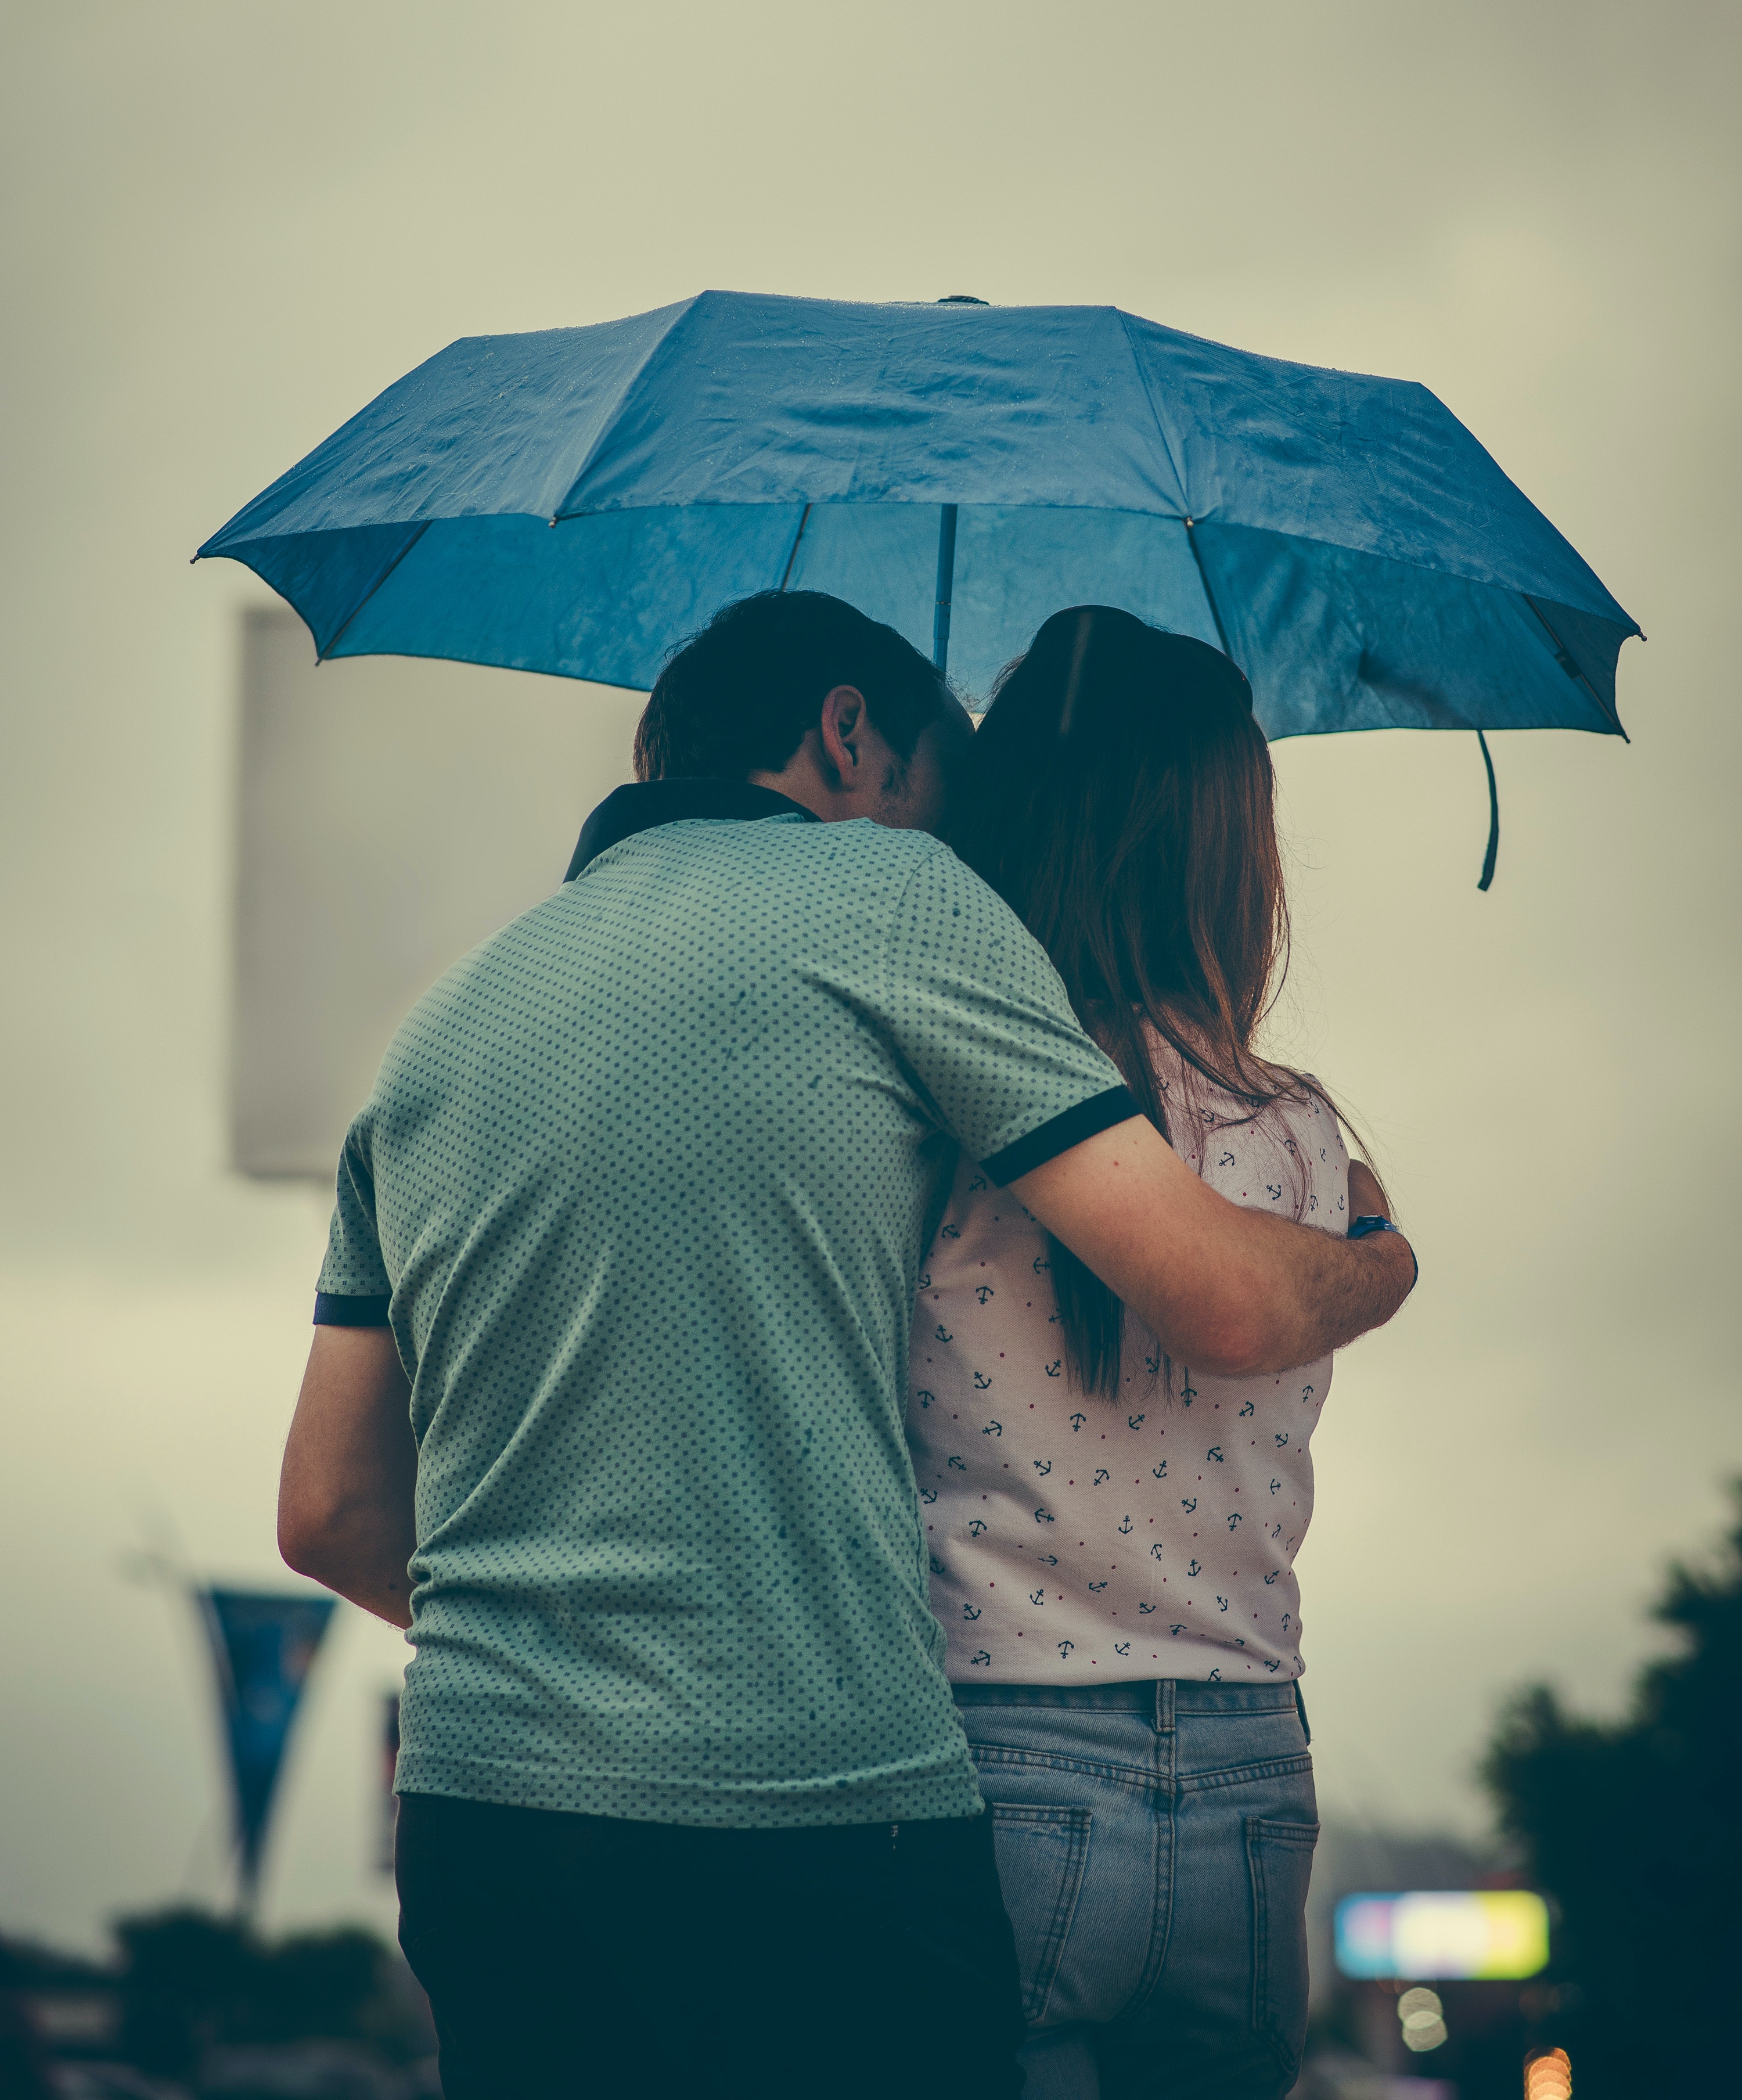 A couple under an umbrella with their backs to the camera, one person with their arm around the other as if to comfort them.